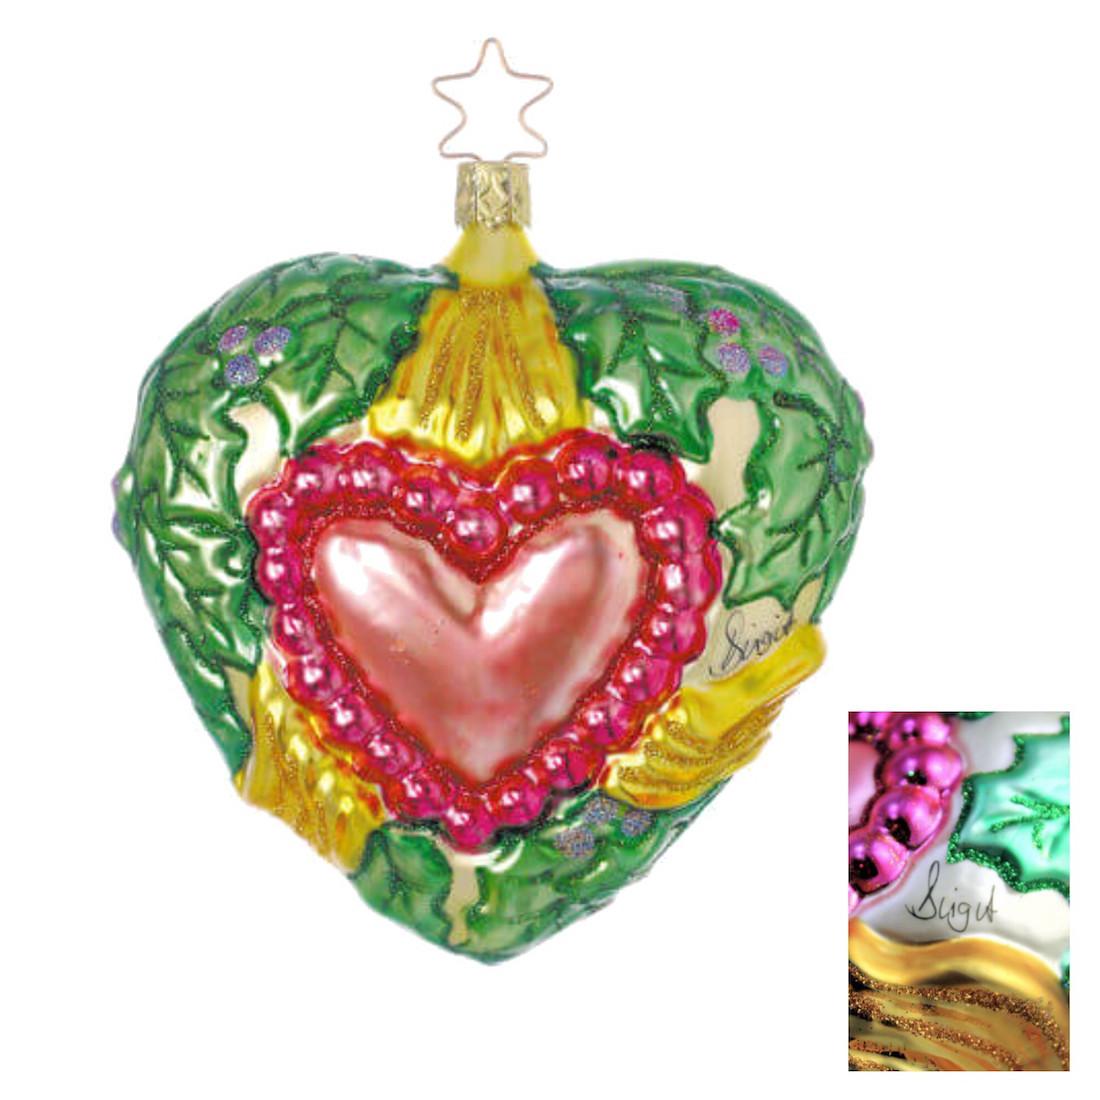 Heart of Hope Ornament by Inge Glas of Germany